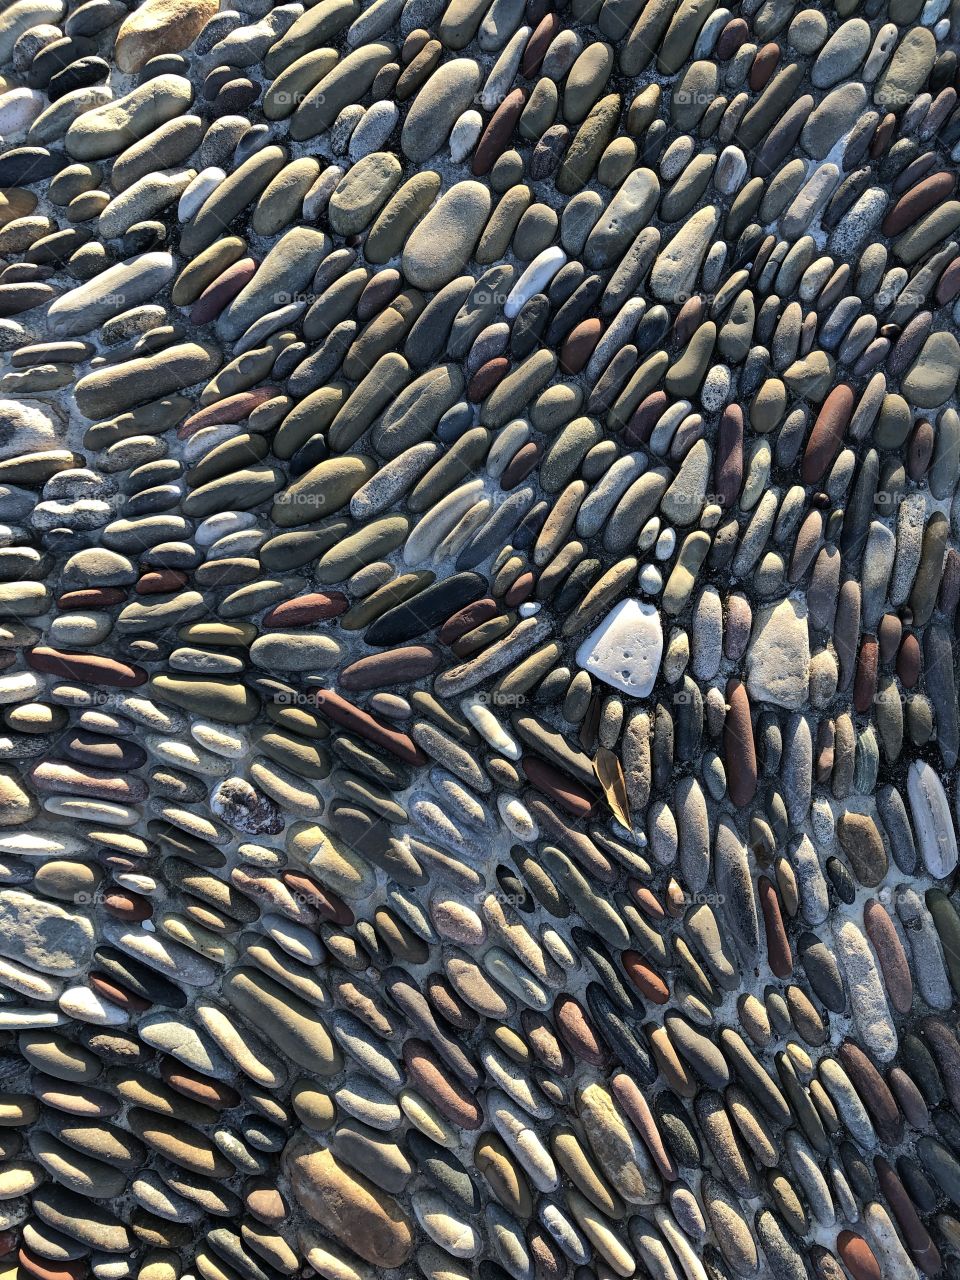 A sea of smooth rocks laid on their sides to create a pattern